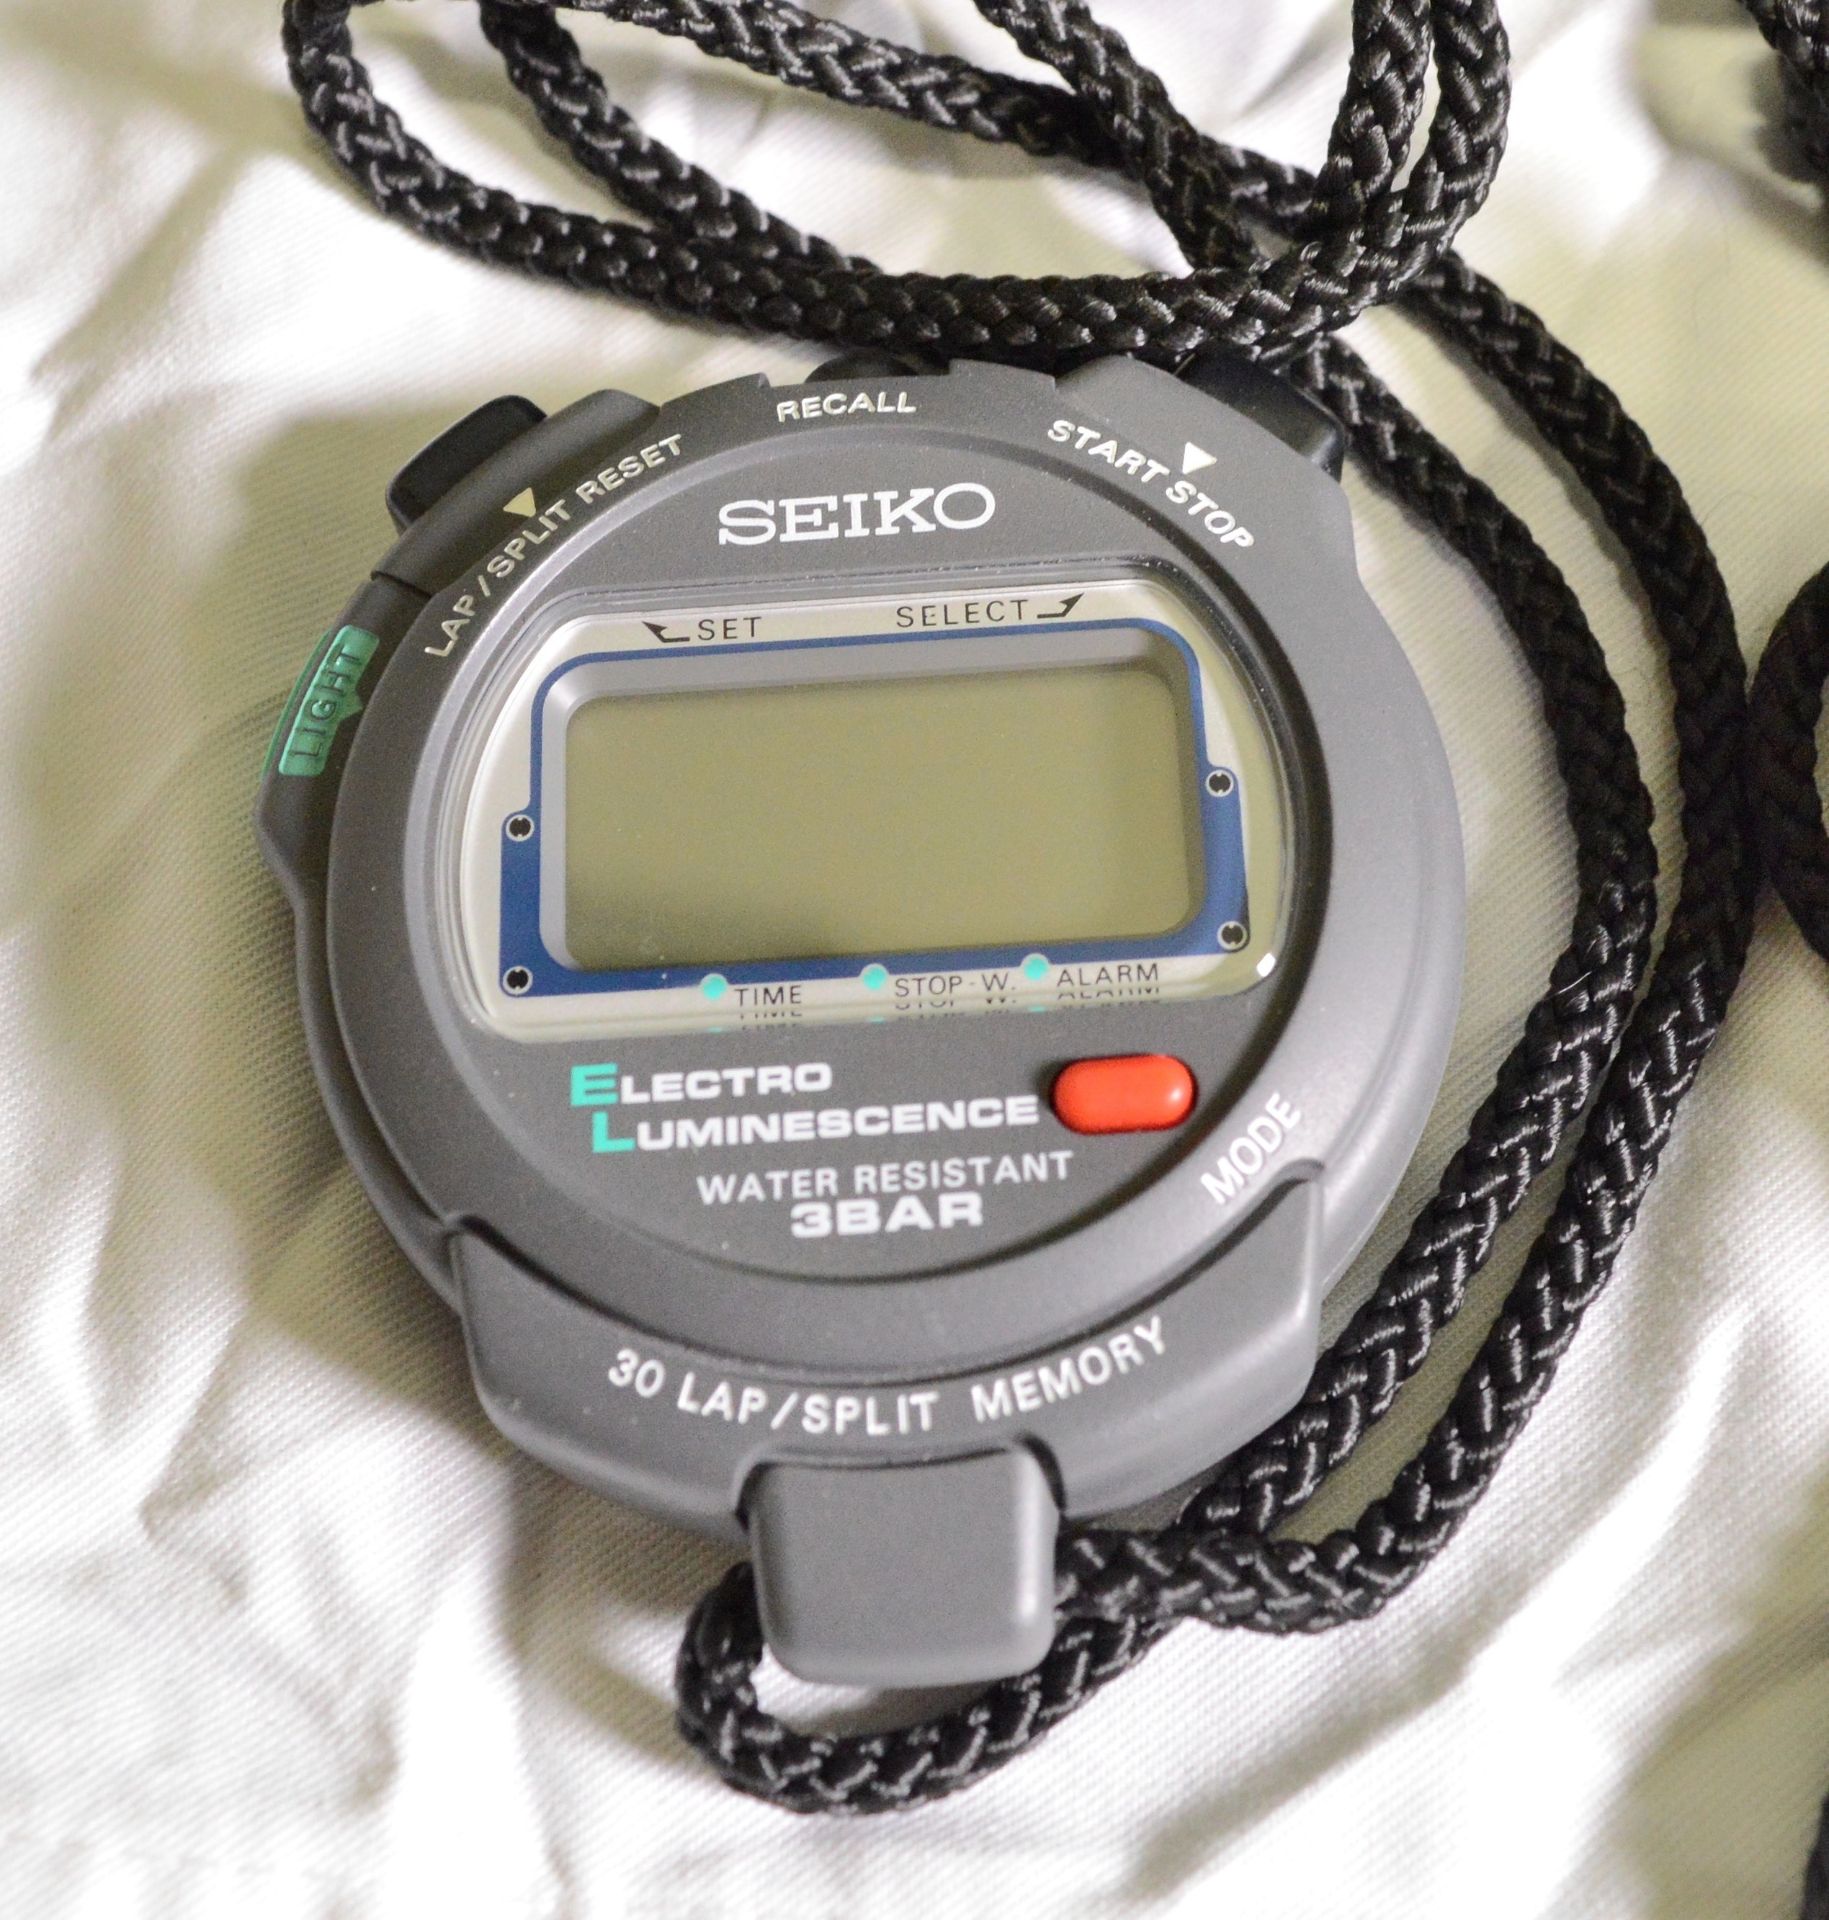 3x Seiko Digital Stopwatches with Case. - Image 3 of 5